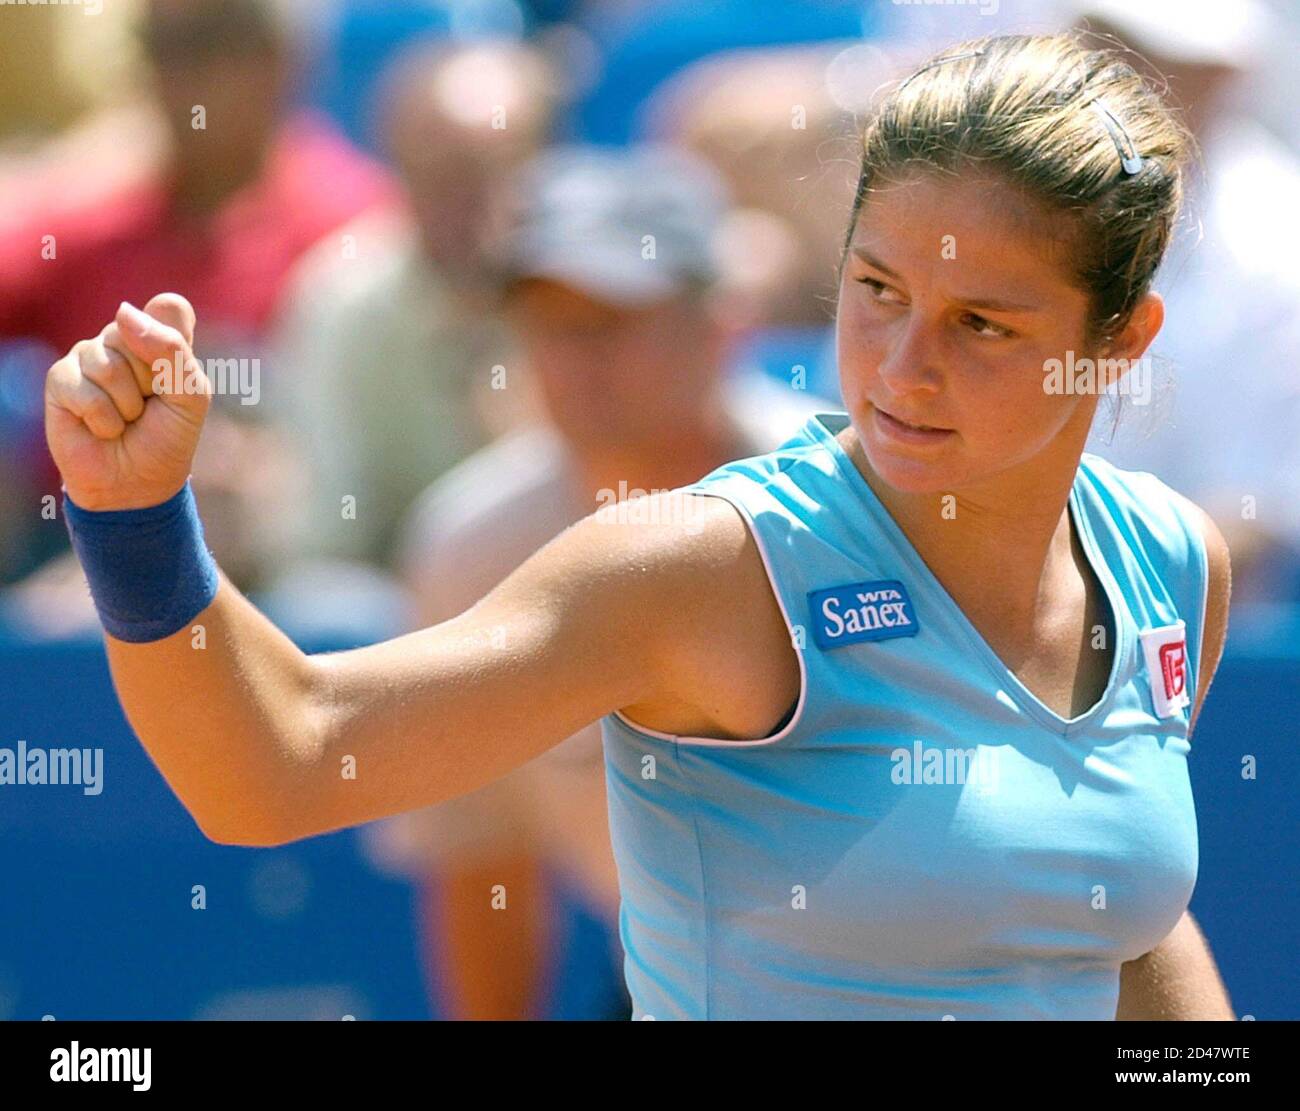 Jelena Kostanic of Croatia reacts after she won a point during her Fed Cup  quarter final match against Barbara Schwartz of Austria in Poertschach on  July 21, 2002. Kostanic lost the match